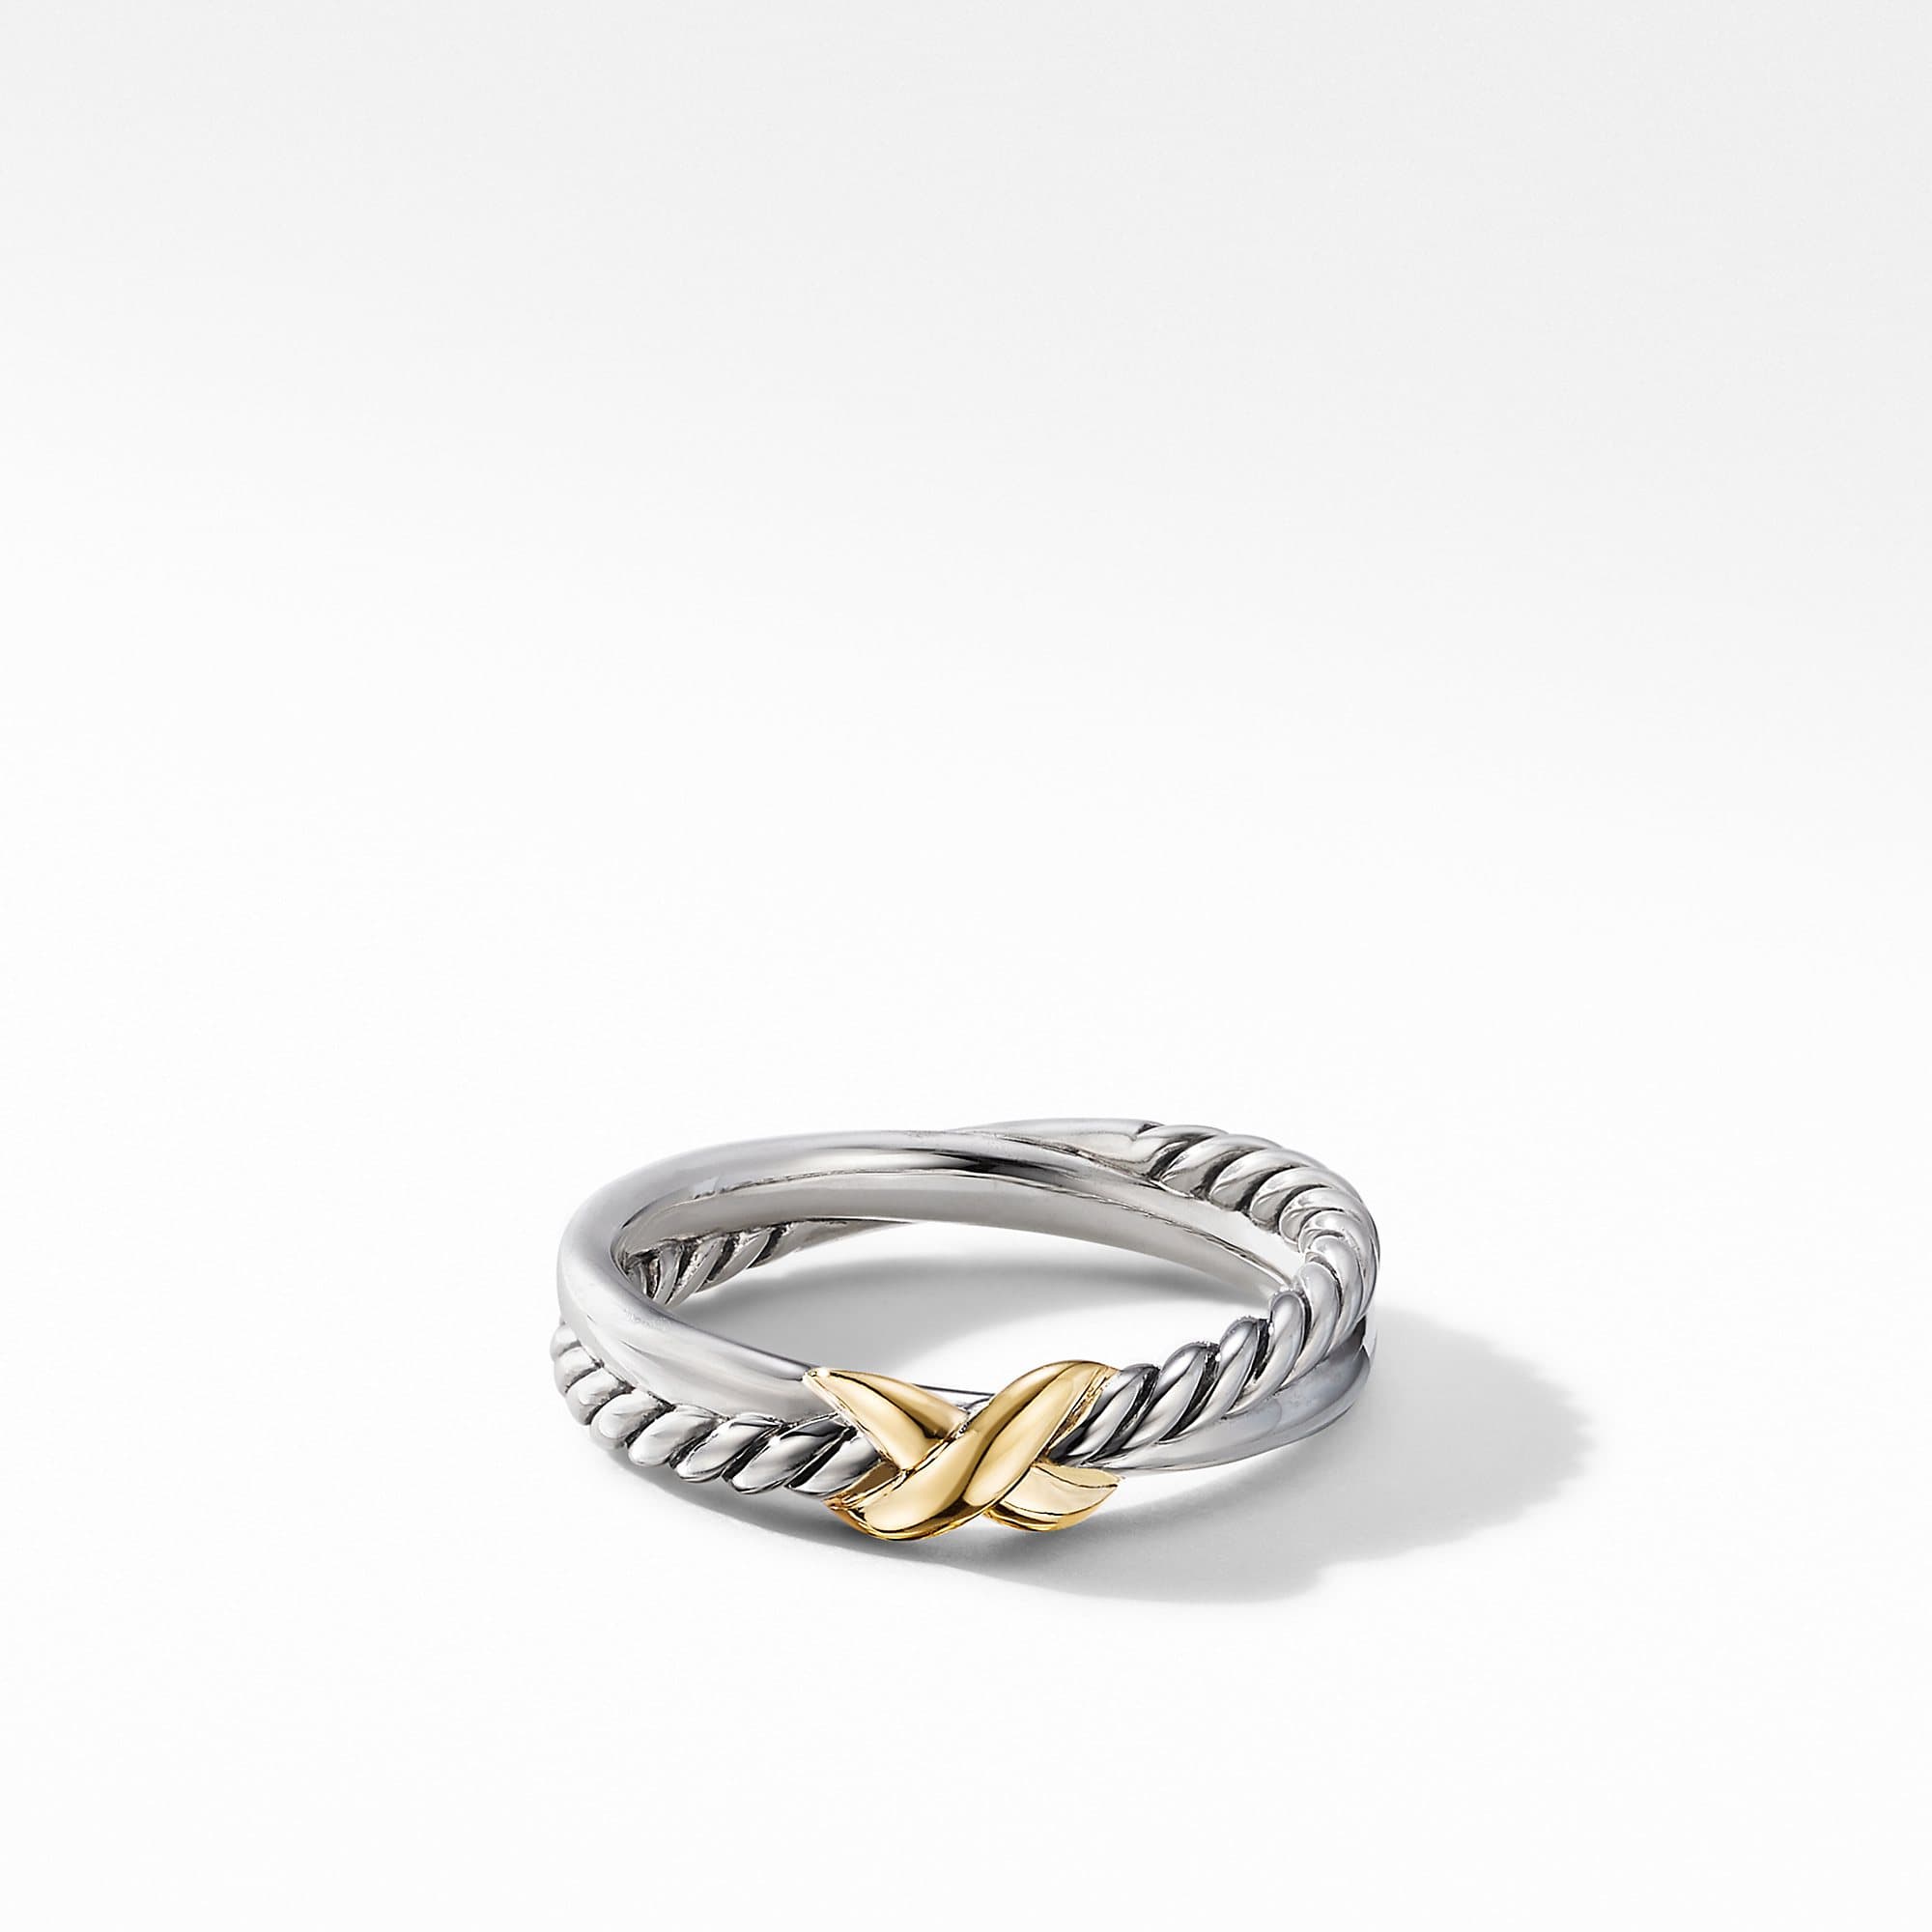 David Yurman Petite X Ring in Sterling Silver with 18k Yellow Gold, size 7